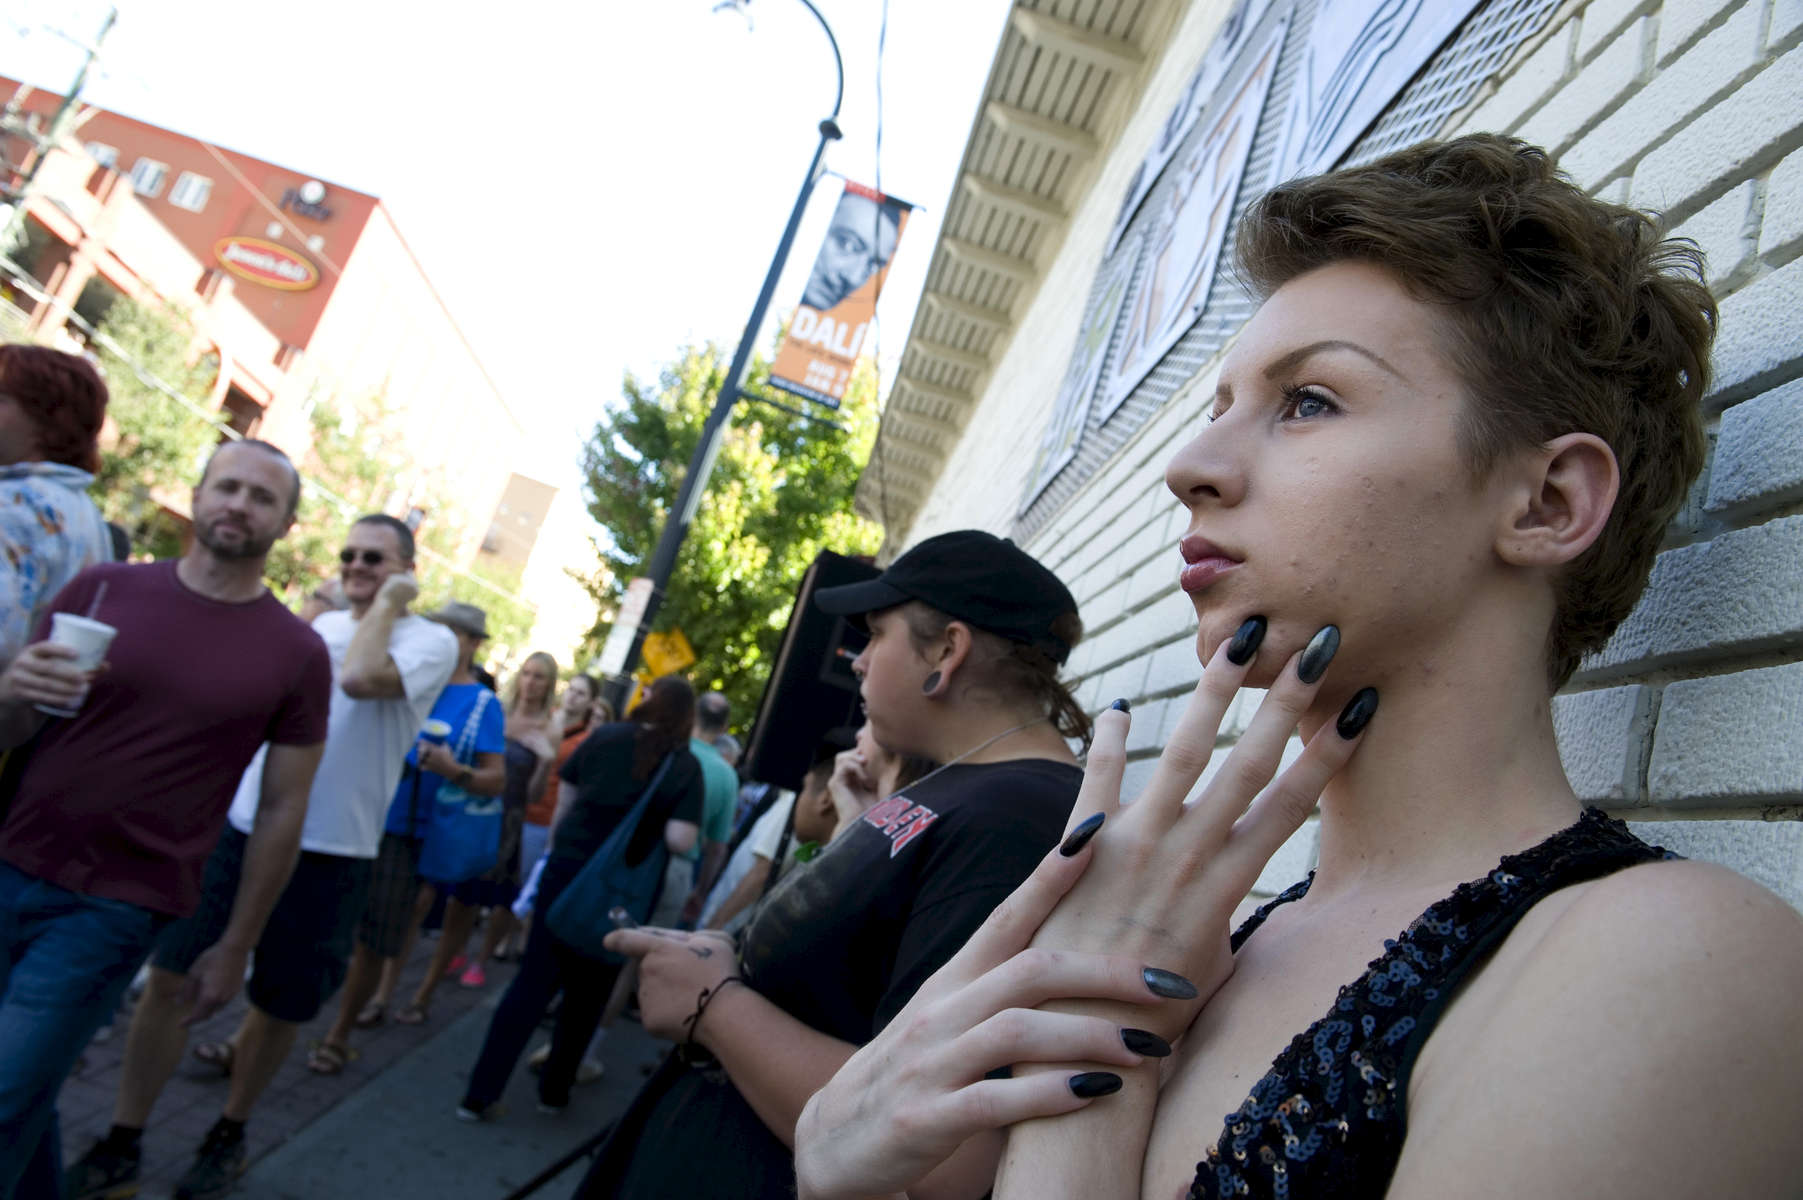 Mitch Le Luxe, a transgender teen, watches the crowd at  Gay Pride festival. He moved to Atlanta from rural Arkansas. In the midst of the conservative  and often bigoted South, Atlanta is considered an oasis of acceptance of the transgender community.